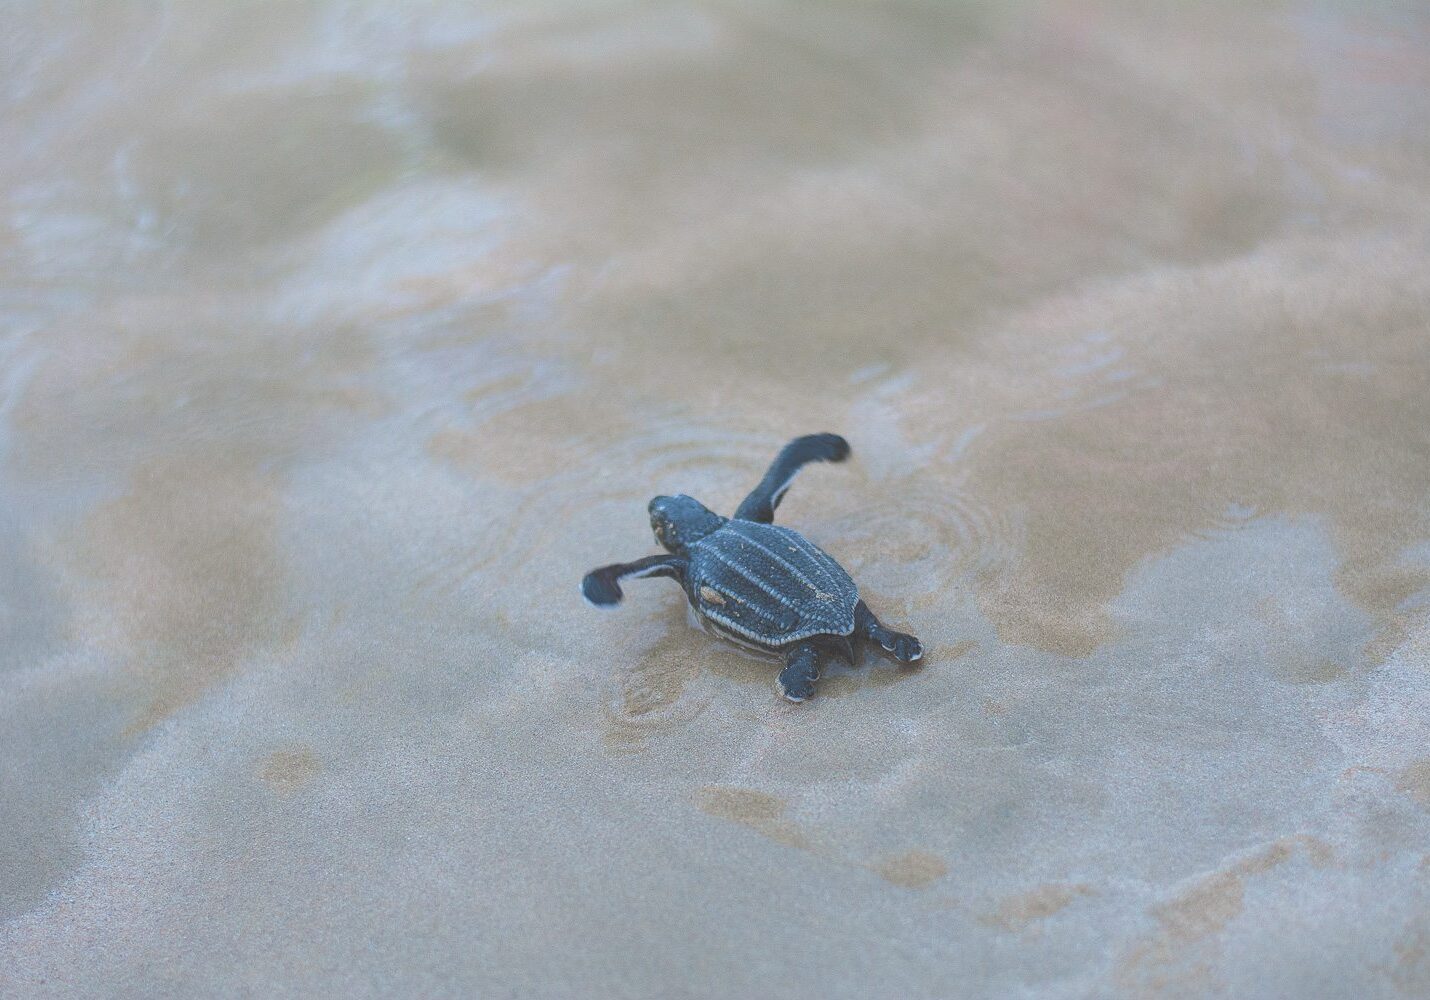 The Hatchling starting his path towards the ocean.